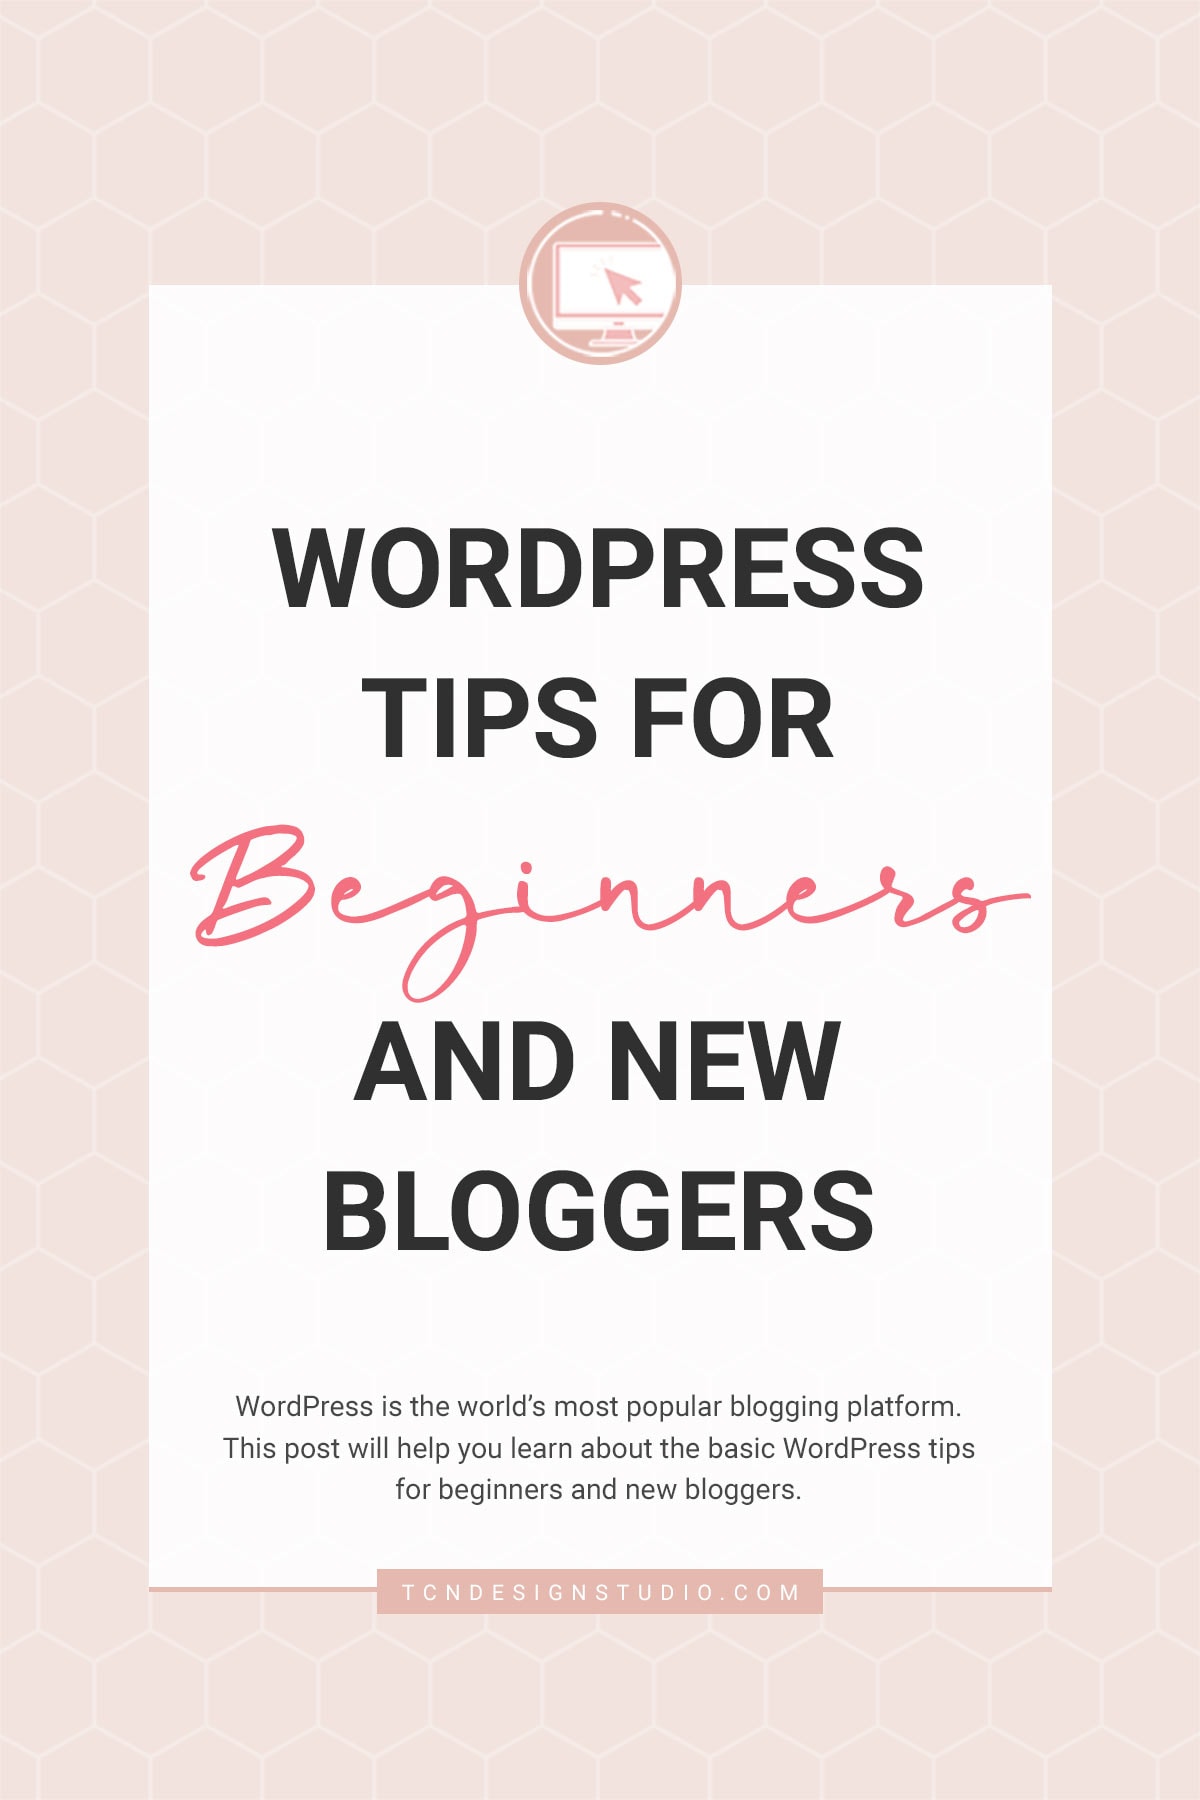 WordPress tips for beginners and new bloggers